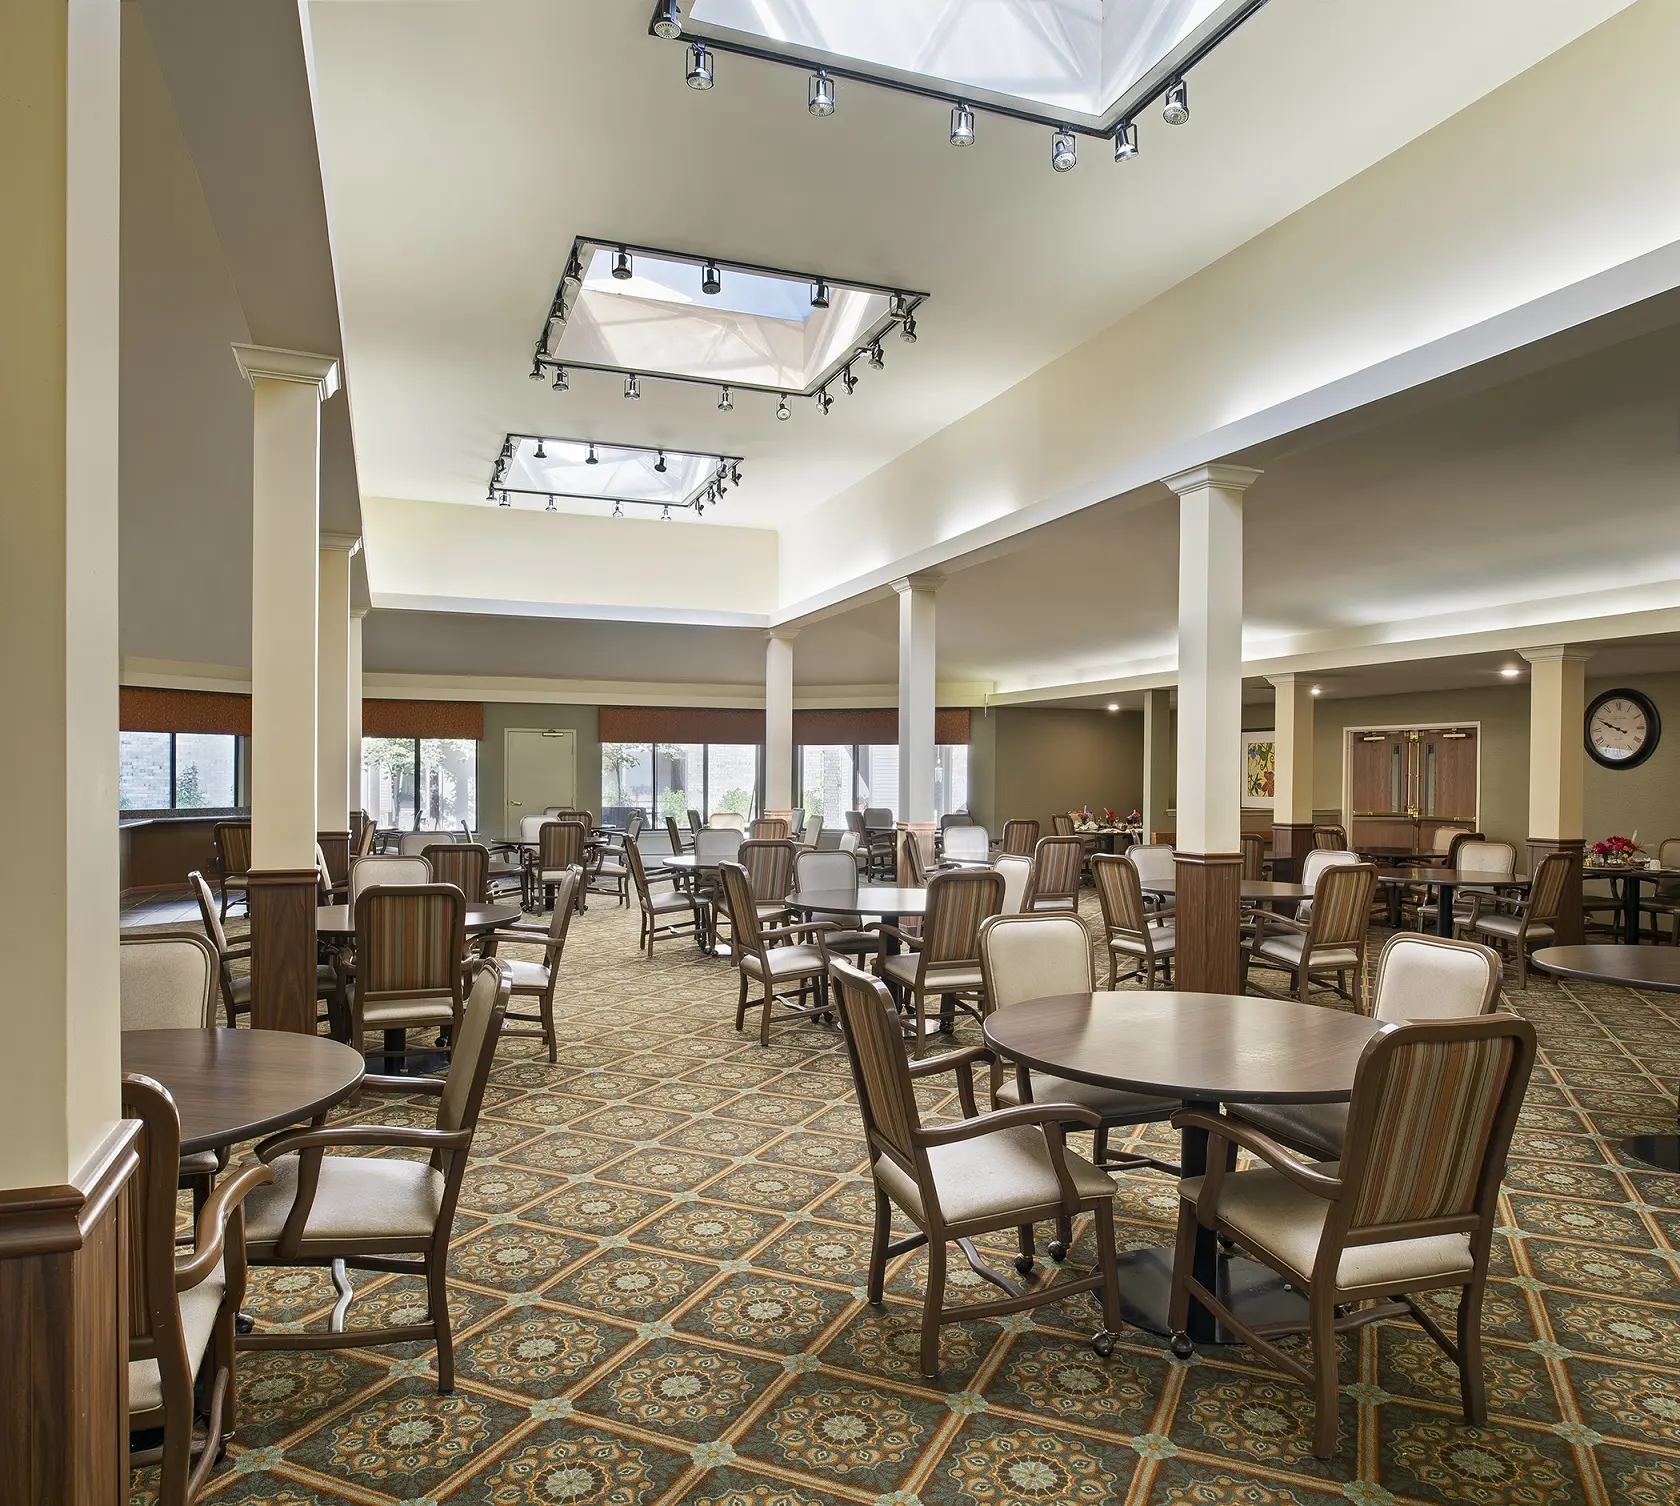 Large carpeted dining area of American House Carpenter, a senior living community in Ypsilanti, Michigan